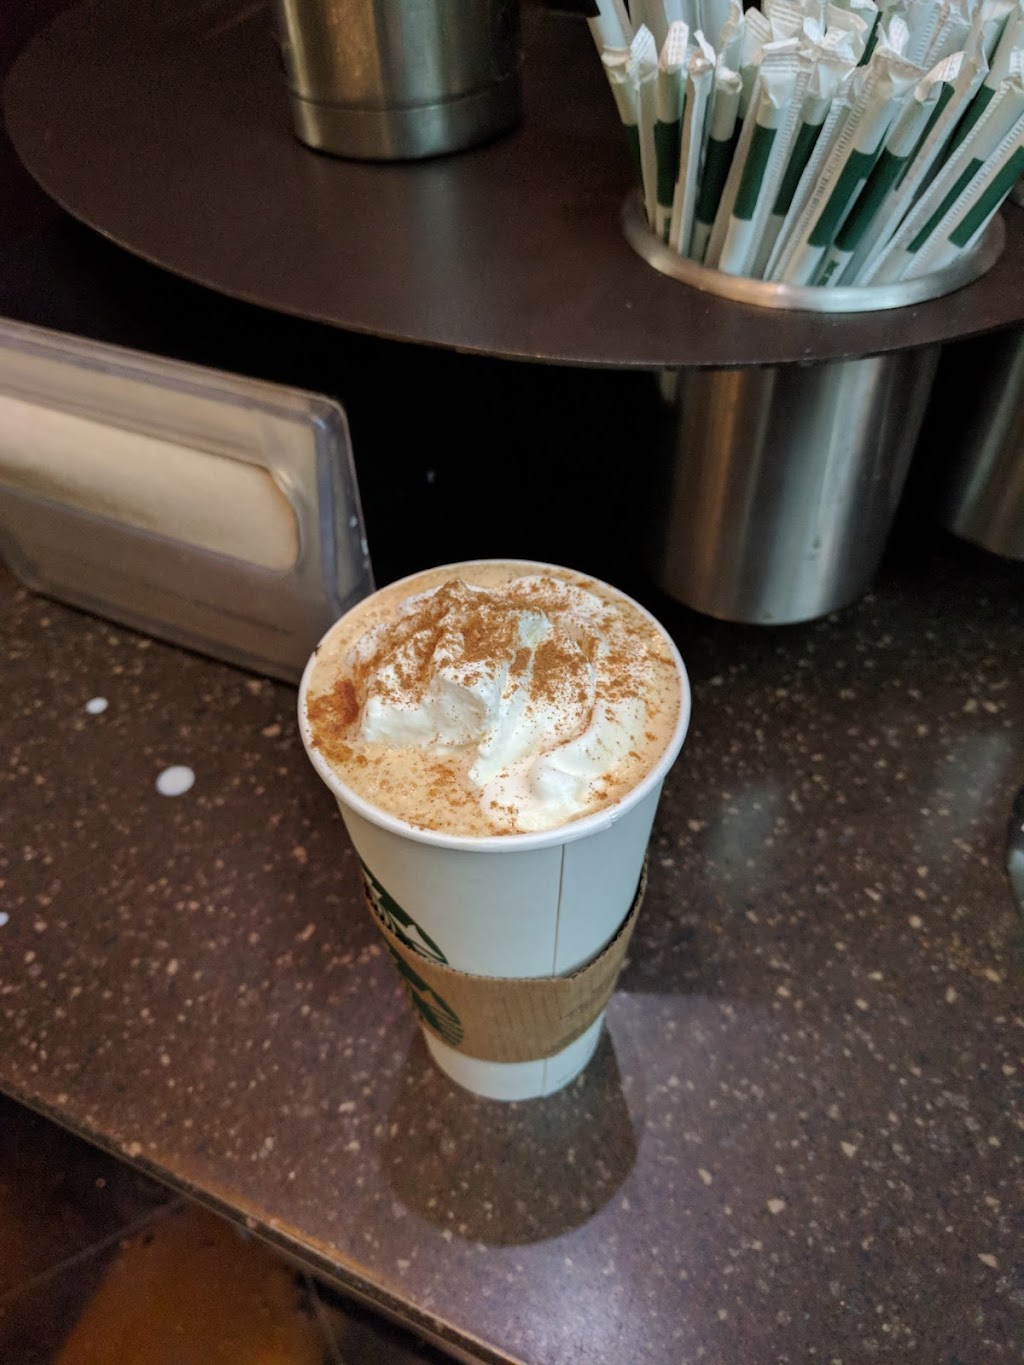 Starbucks | cafe | 4331 Dominion St, Burnaby, BC V5G 1C7, Canada | 6044530750 OR +1 604-453-0750